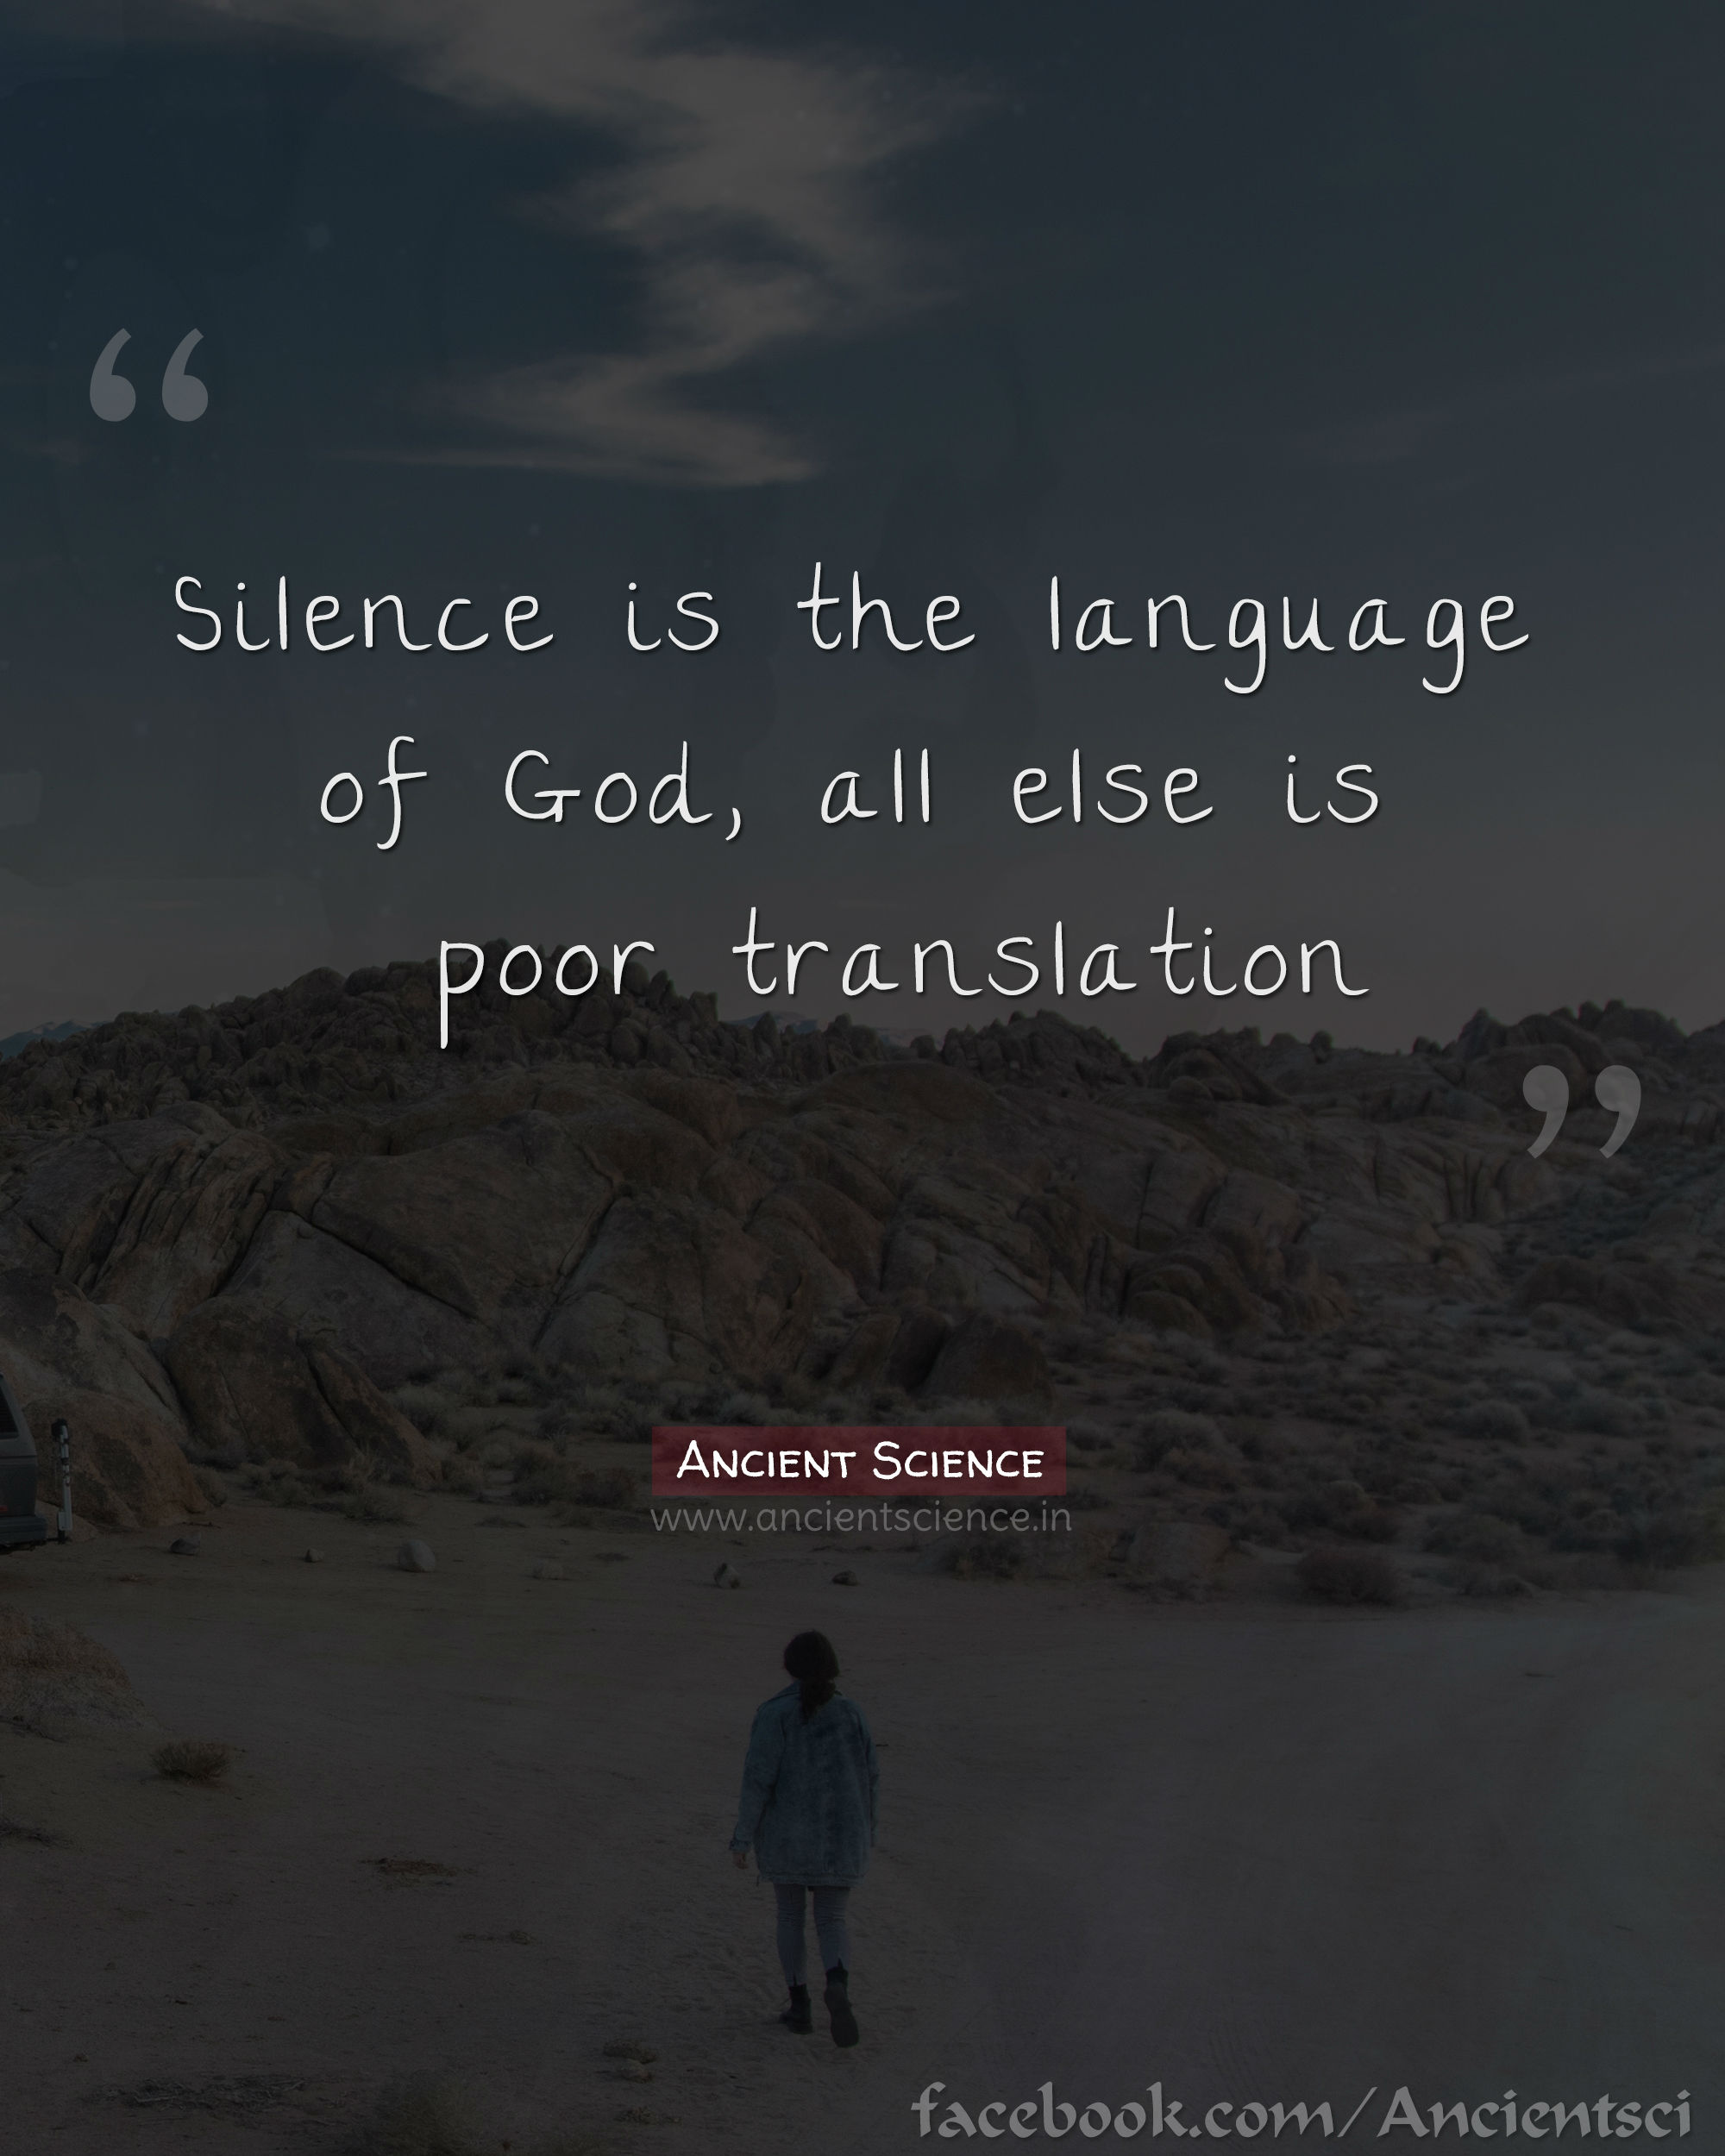 Silence is the language of God, all else is poor translation.